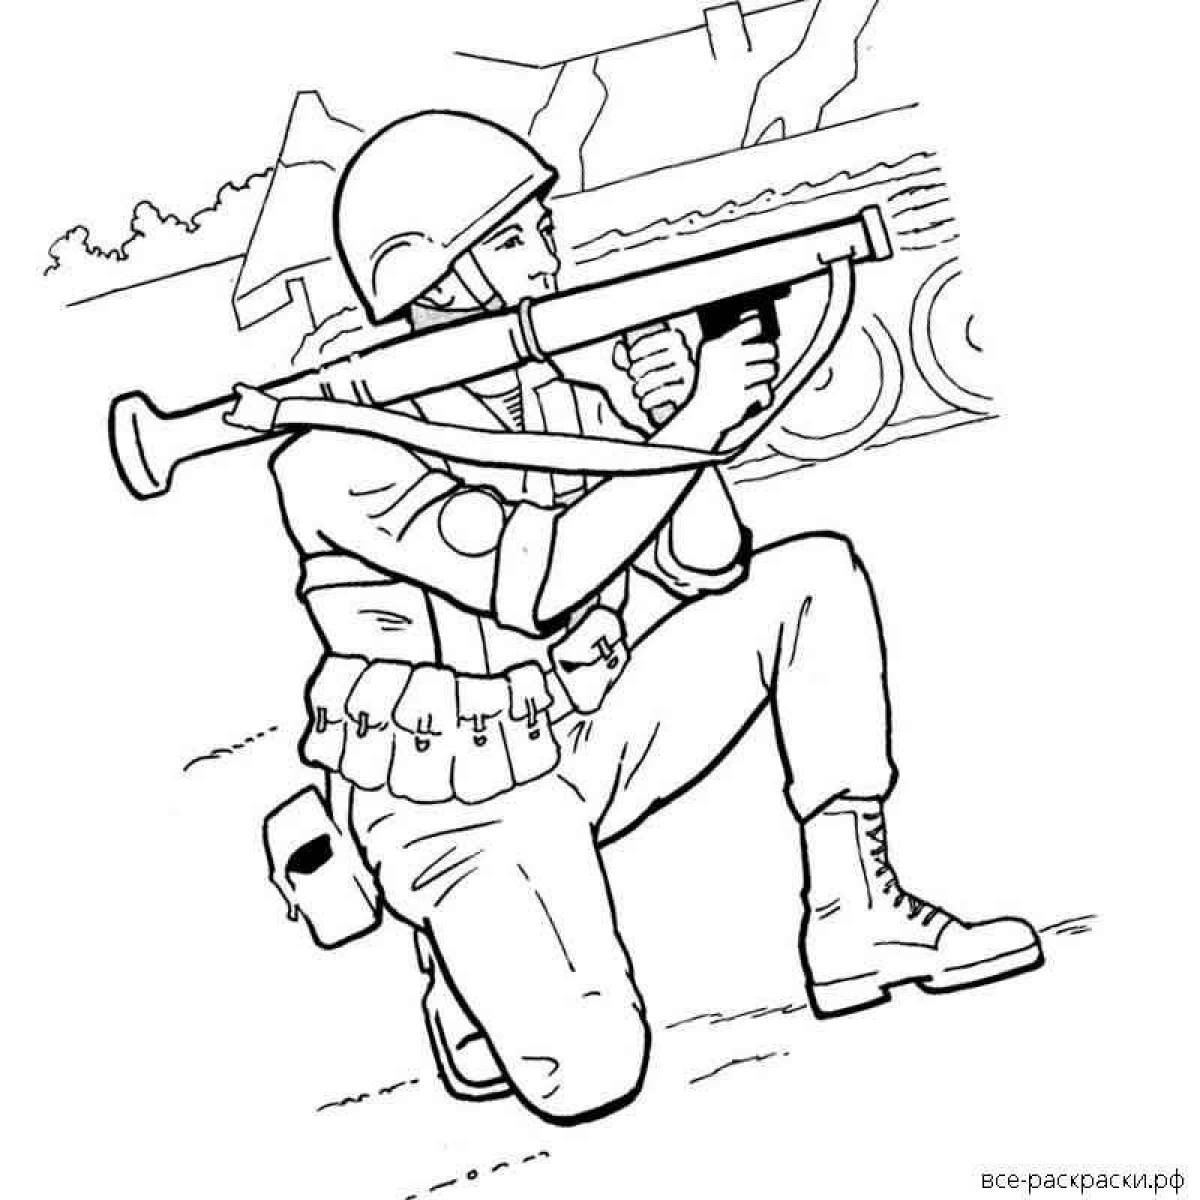 Fearless soldiers coloring pages